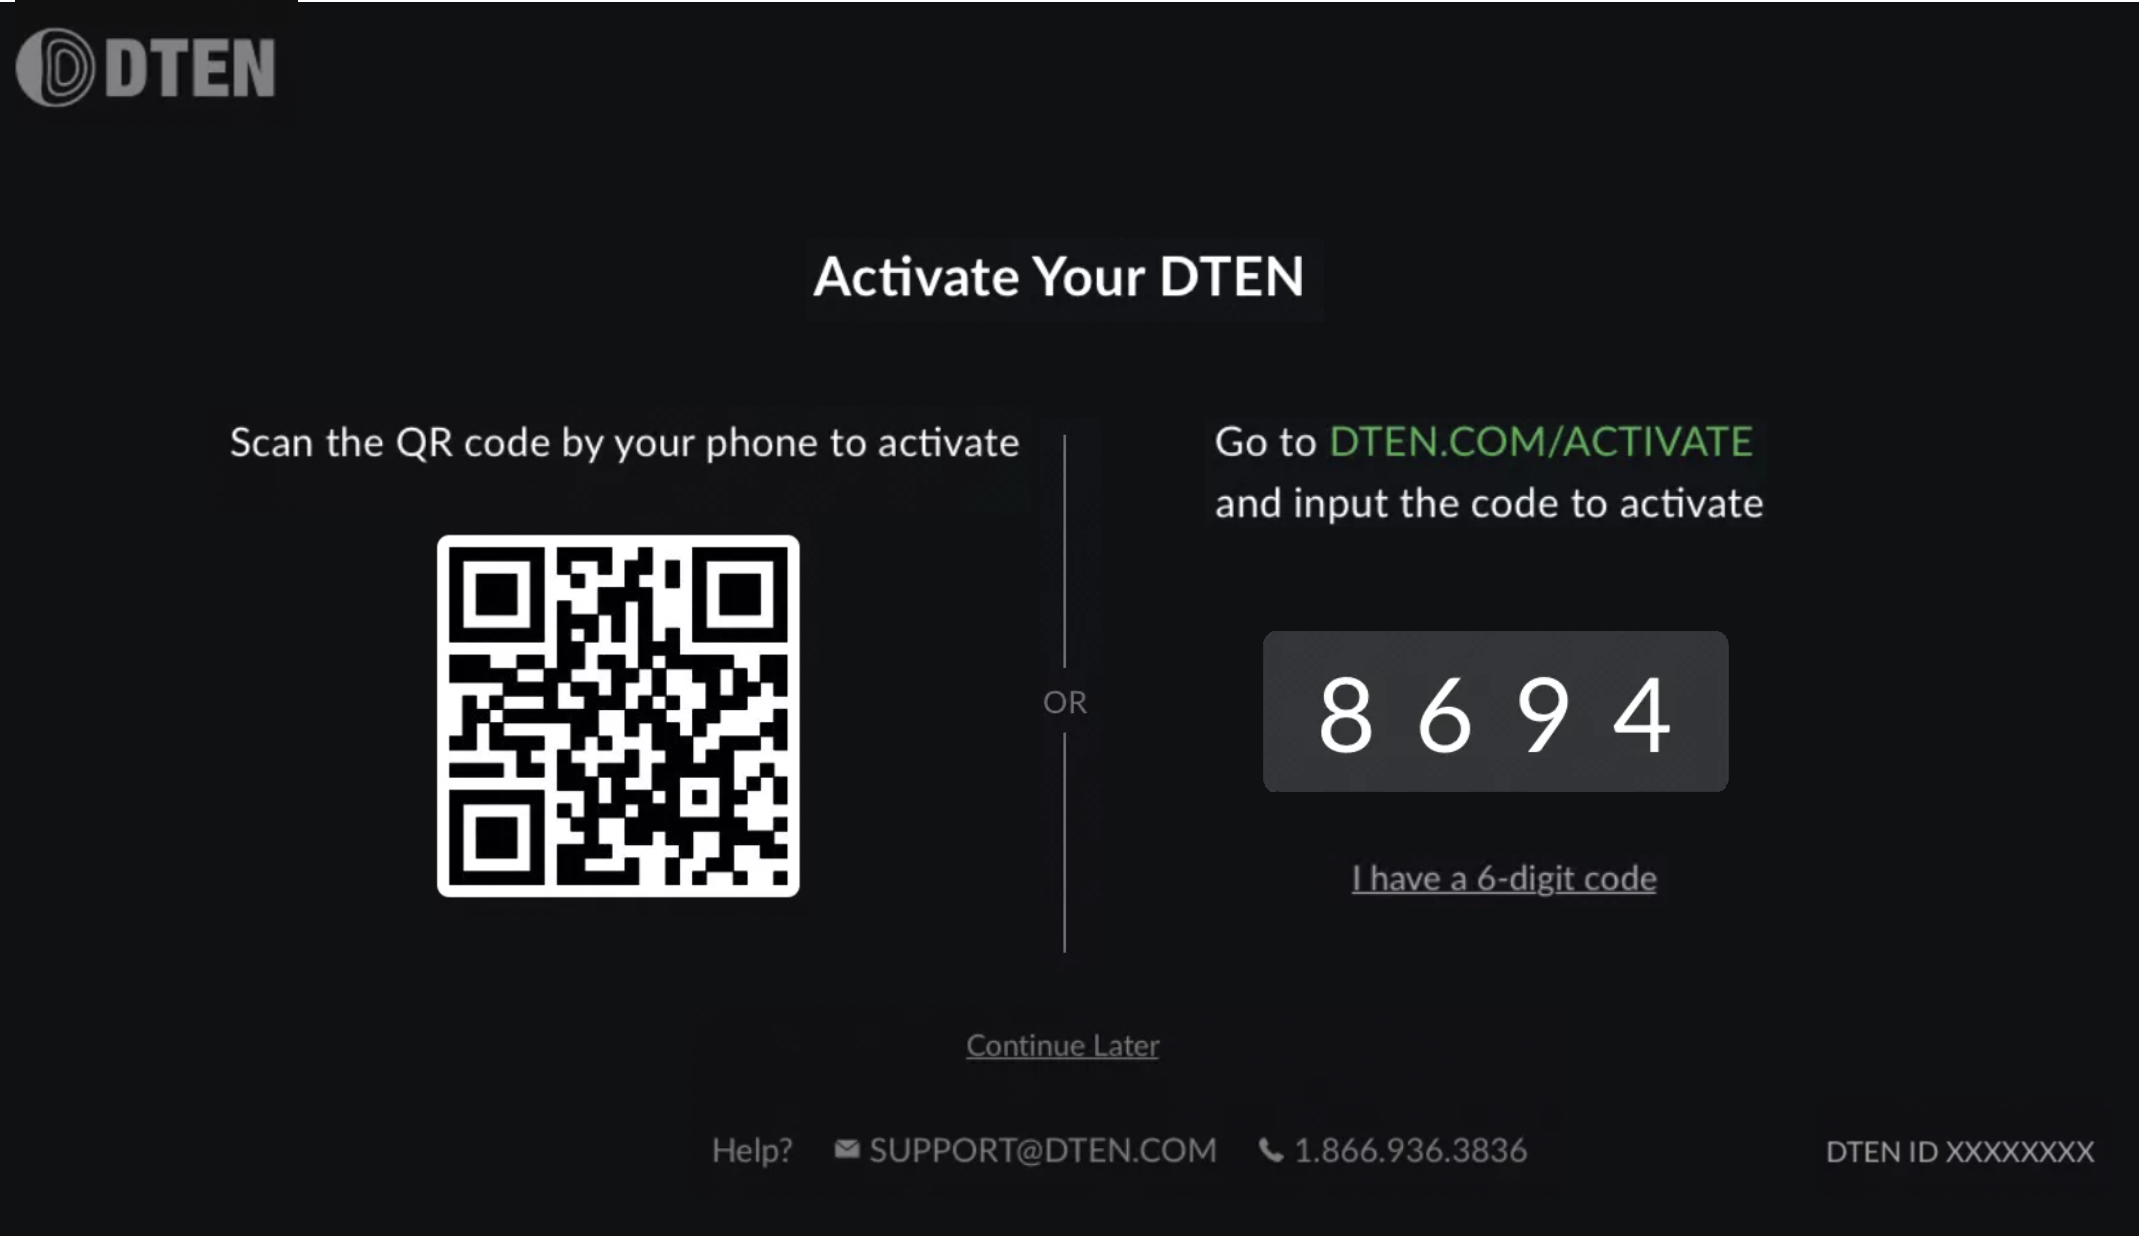 DTEN_MATE_Activate_Your_DTEN_and_Scan_Code.png